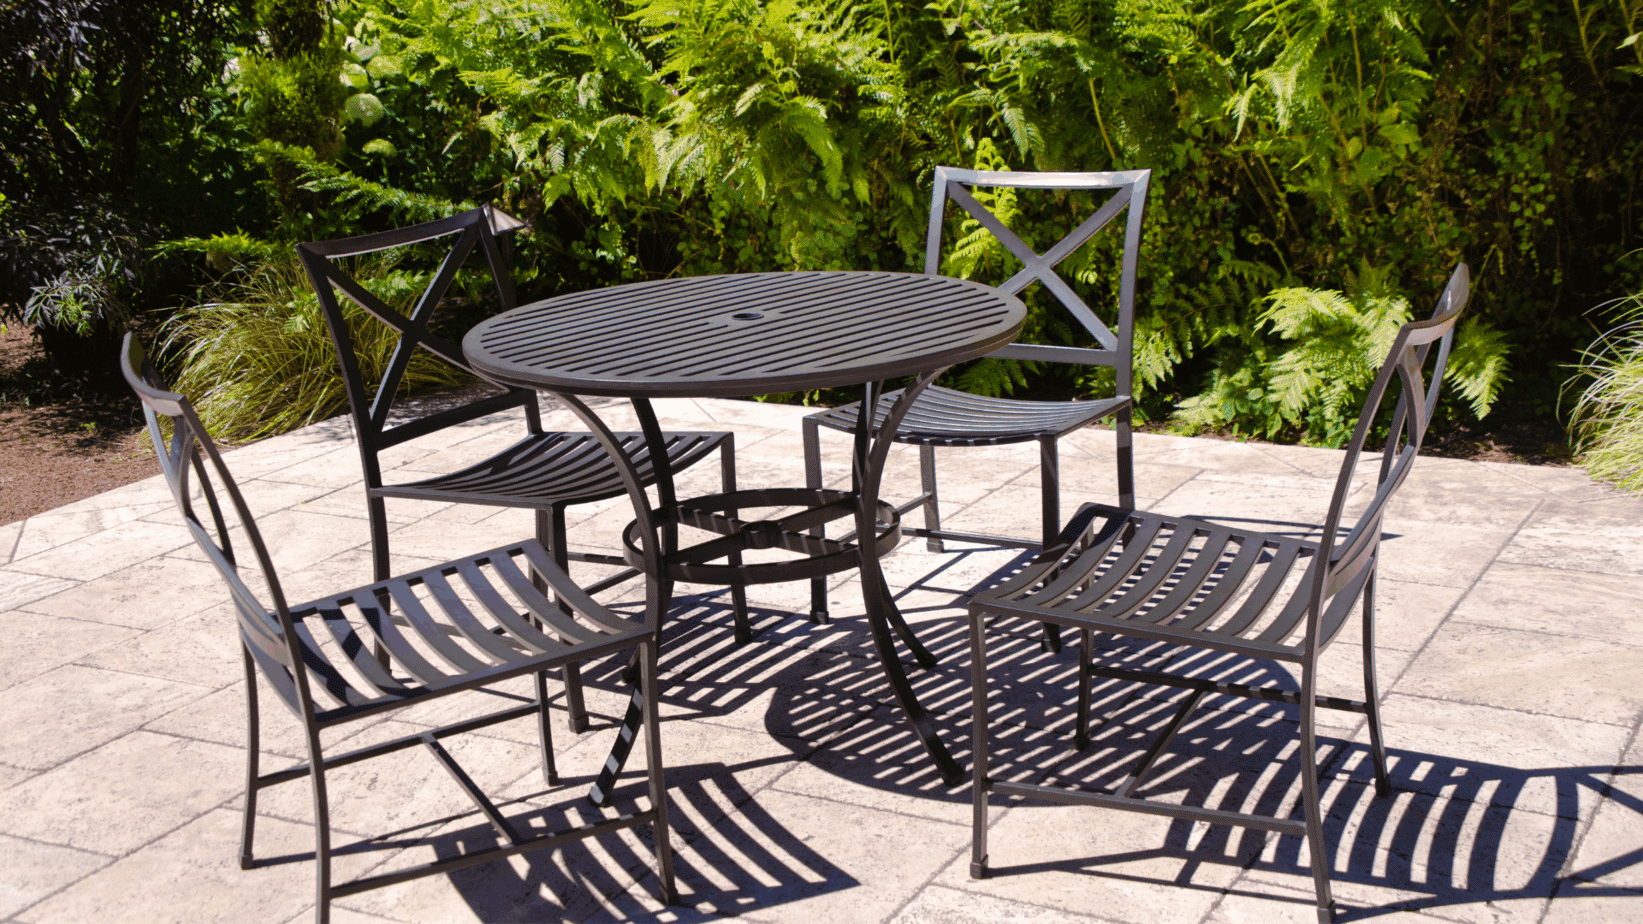 What Is The Best Metal For Patio Furniture? - Craft Gecko